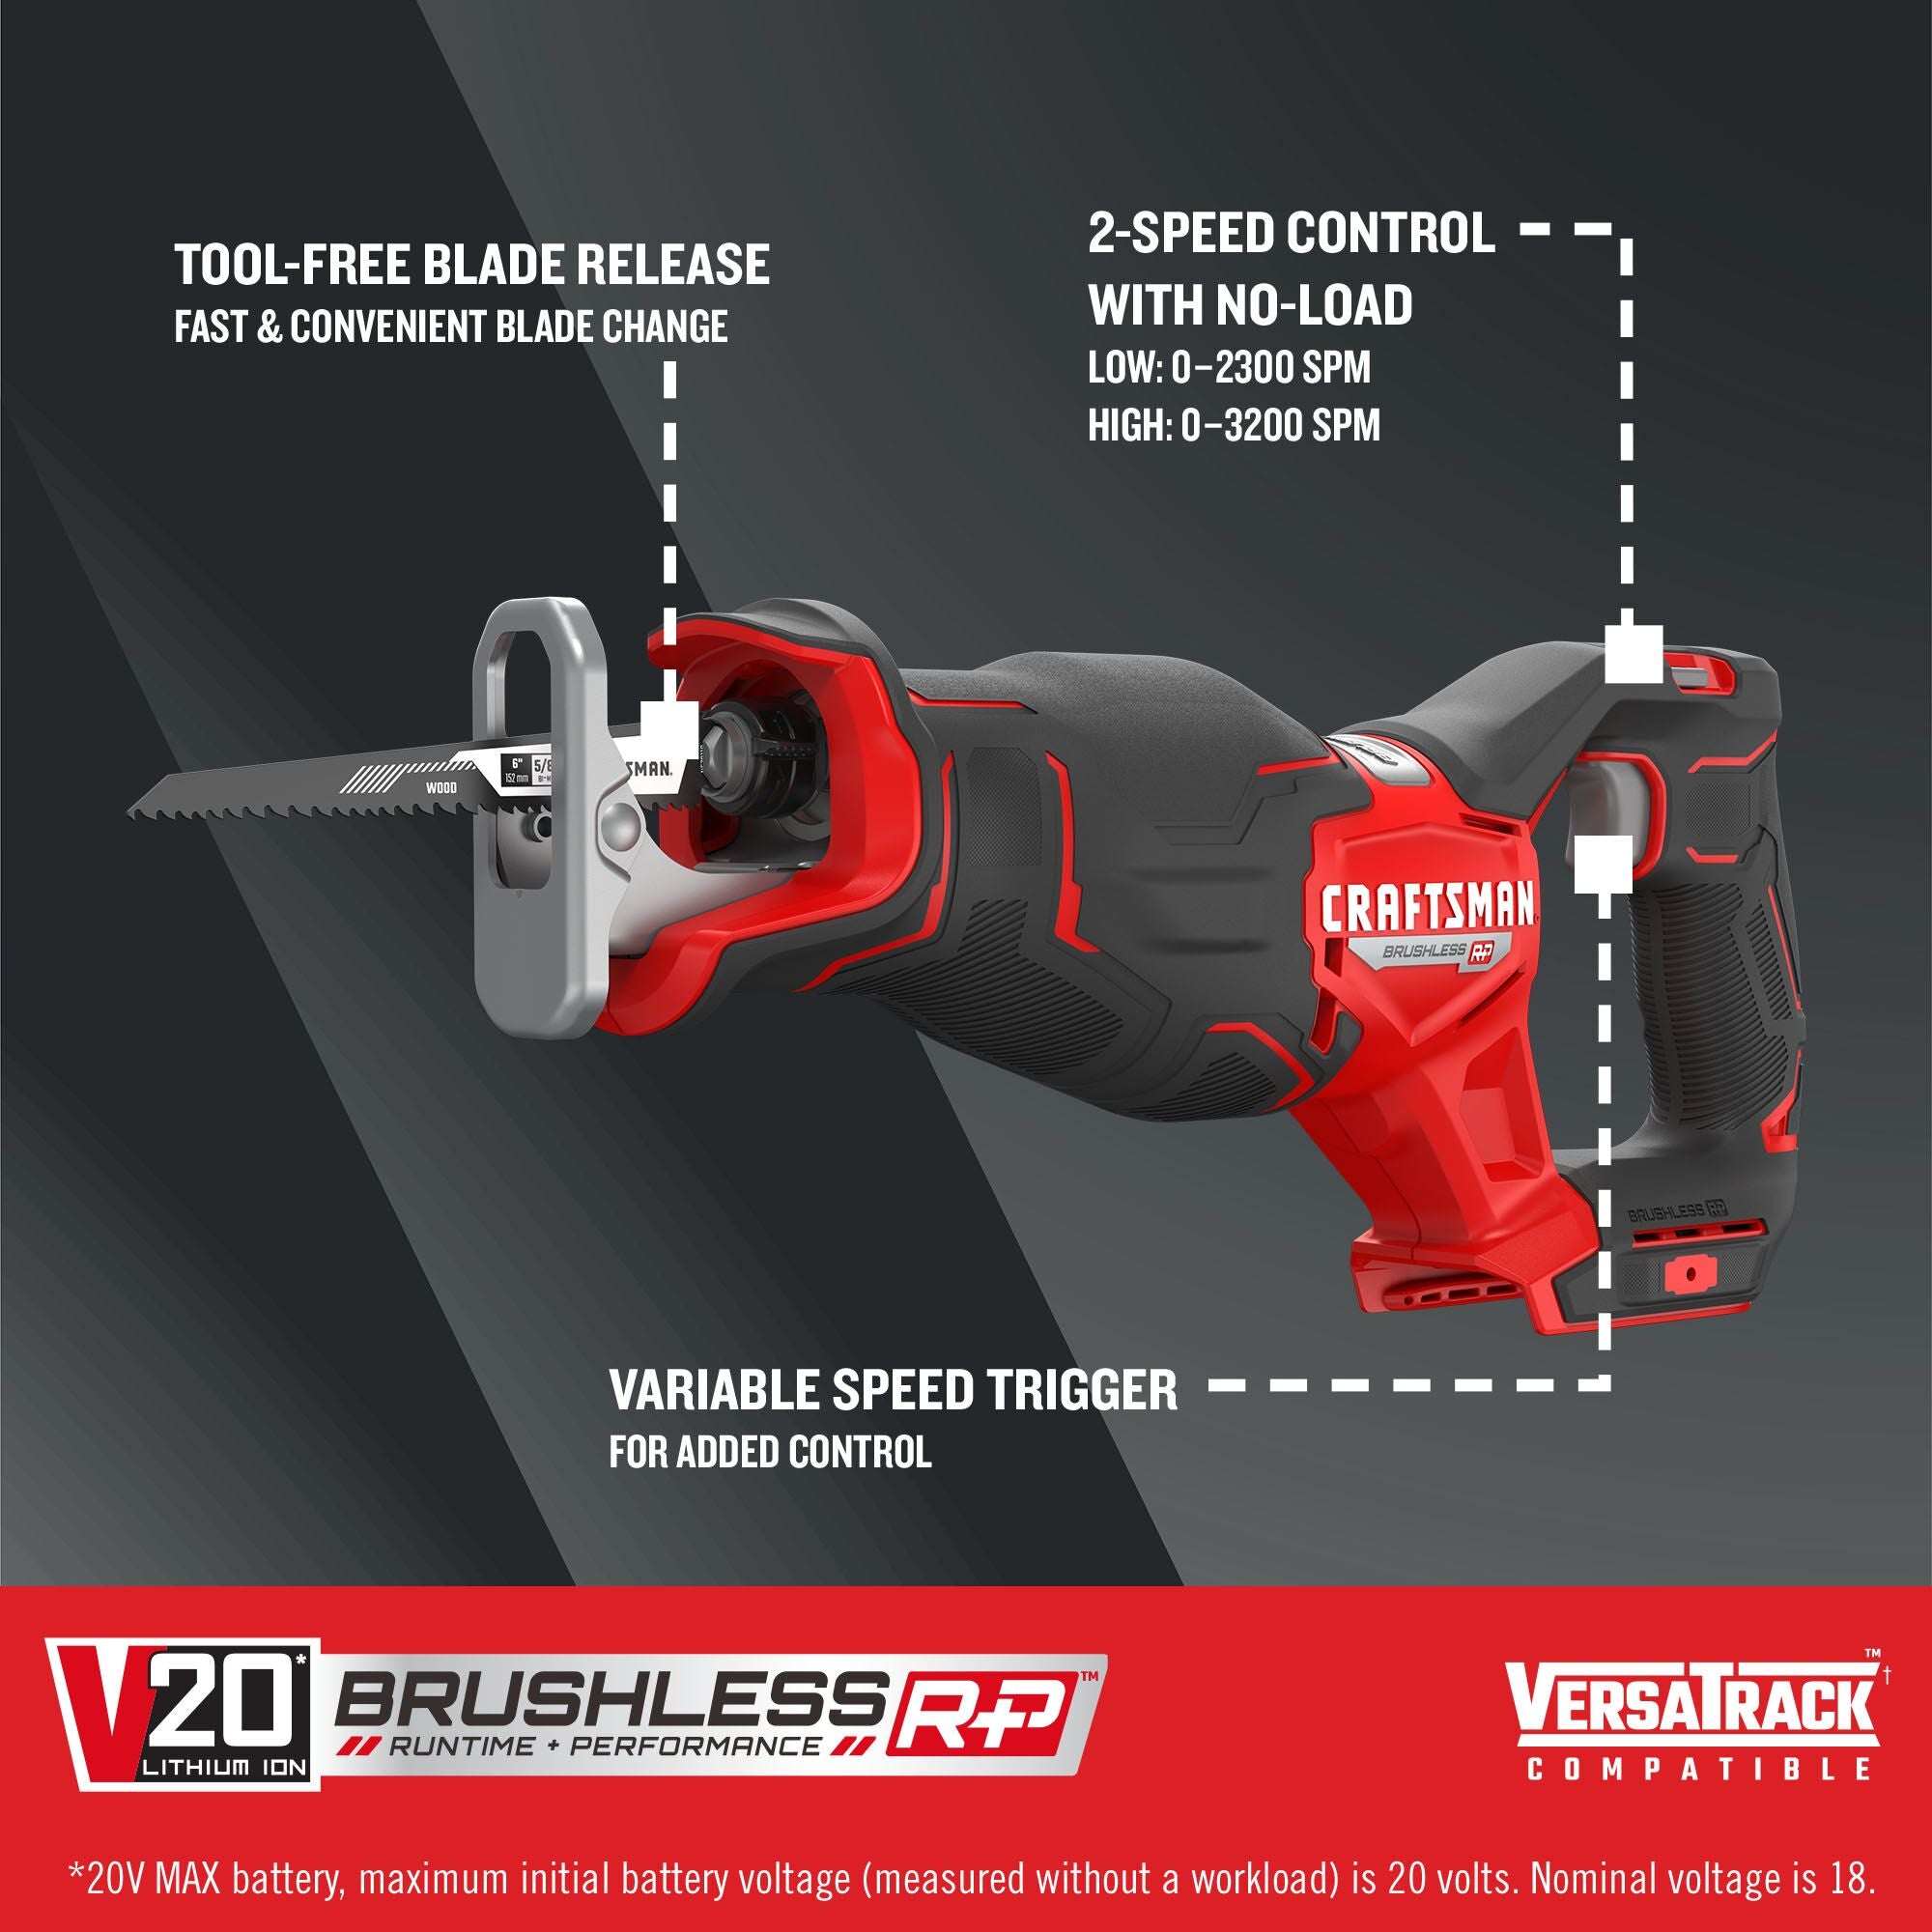 Craftsman V20 Brushless RP Angle Grinder with Paddle-Switch, 3-Position Side Handle, and Tool Free Guard